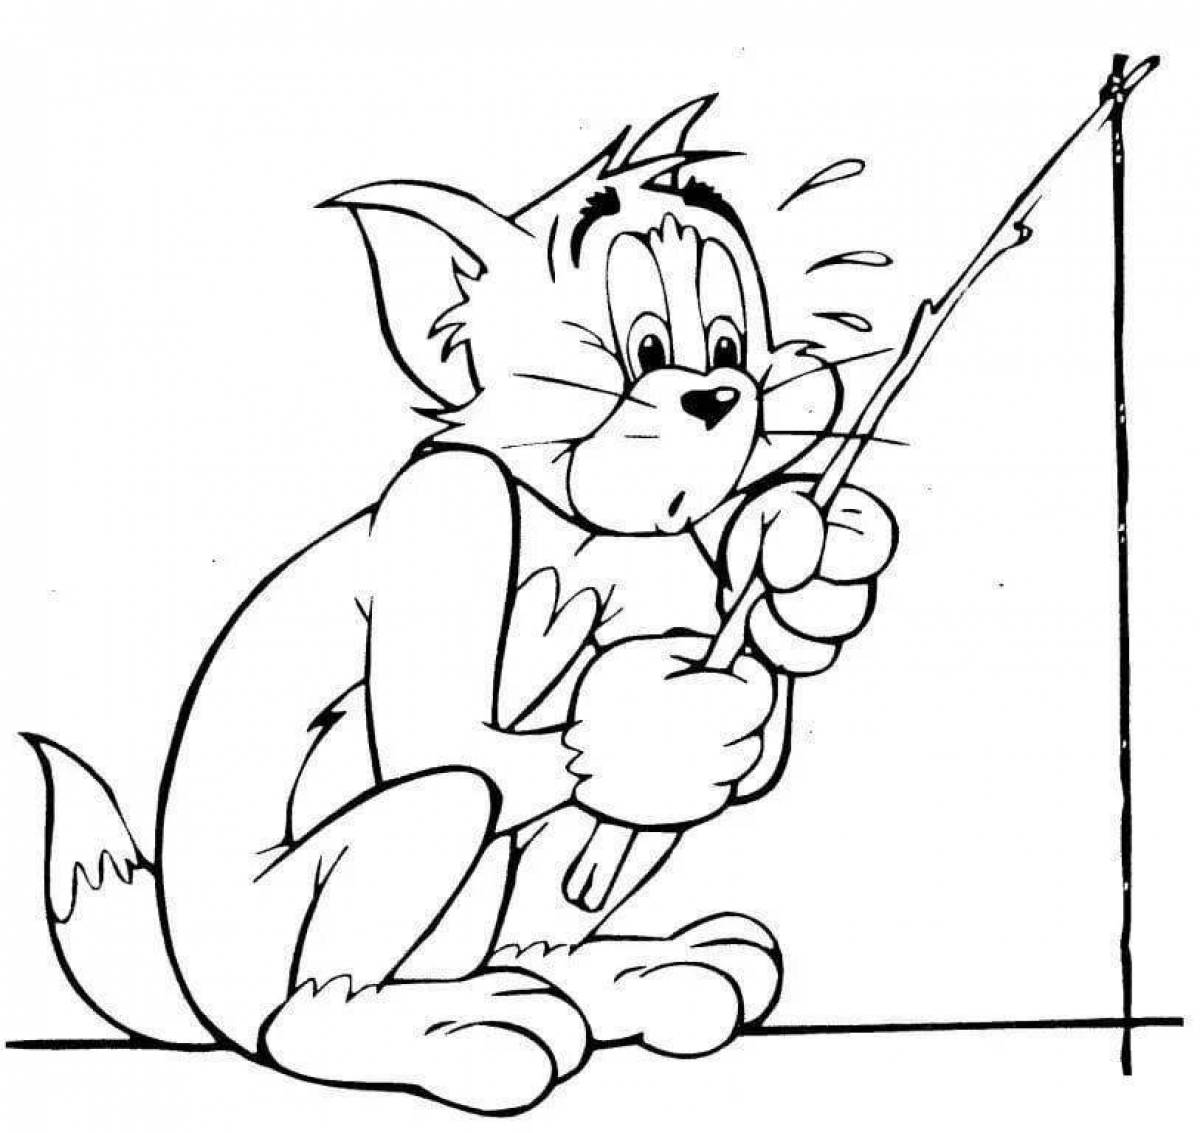 Horny jerry coloring page